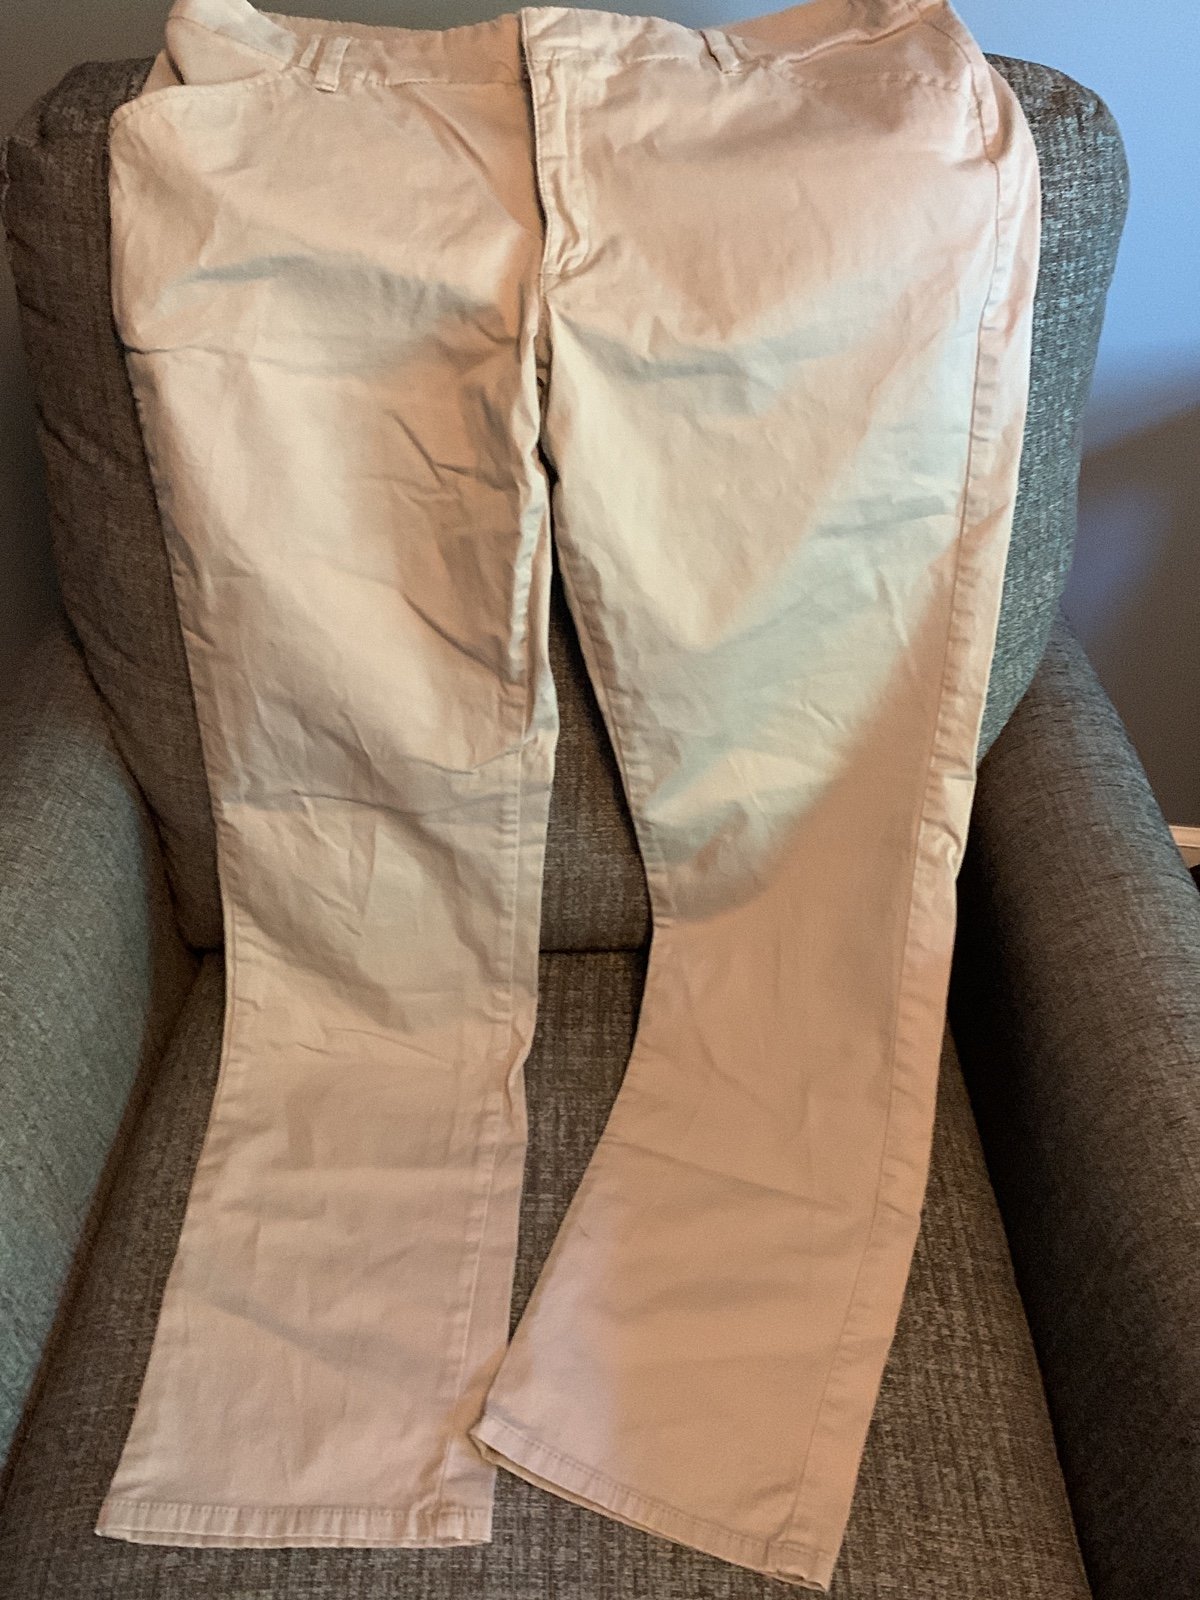 the Lowest price Lee size 14 pants IcH10TXkJ Online Exclusive